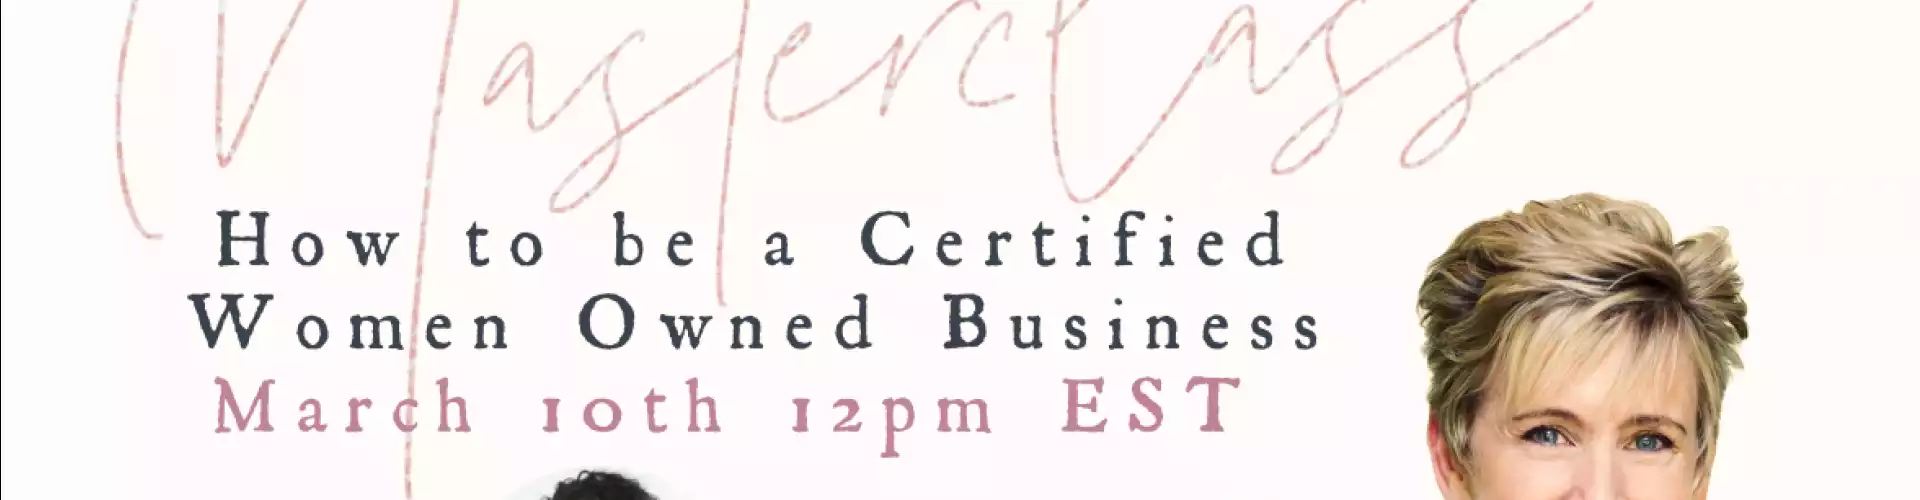 How to be a Certified Women Owned Business